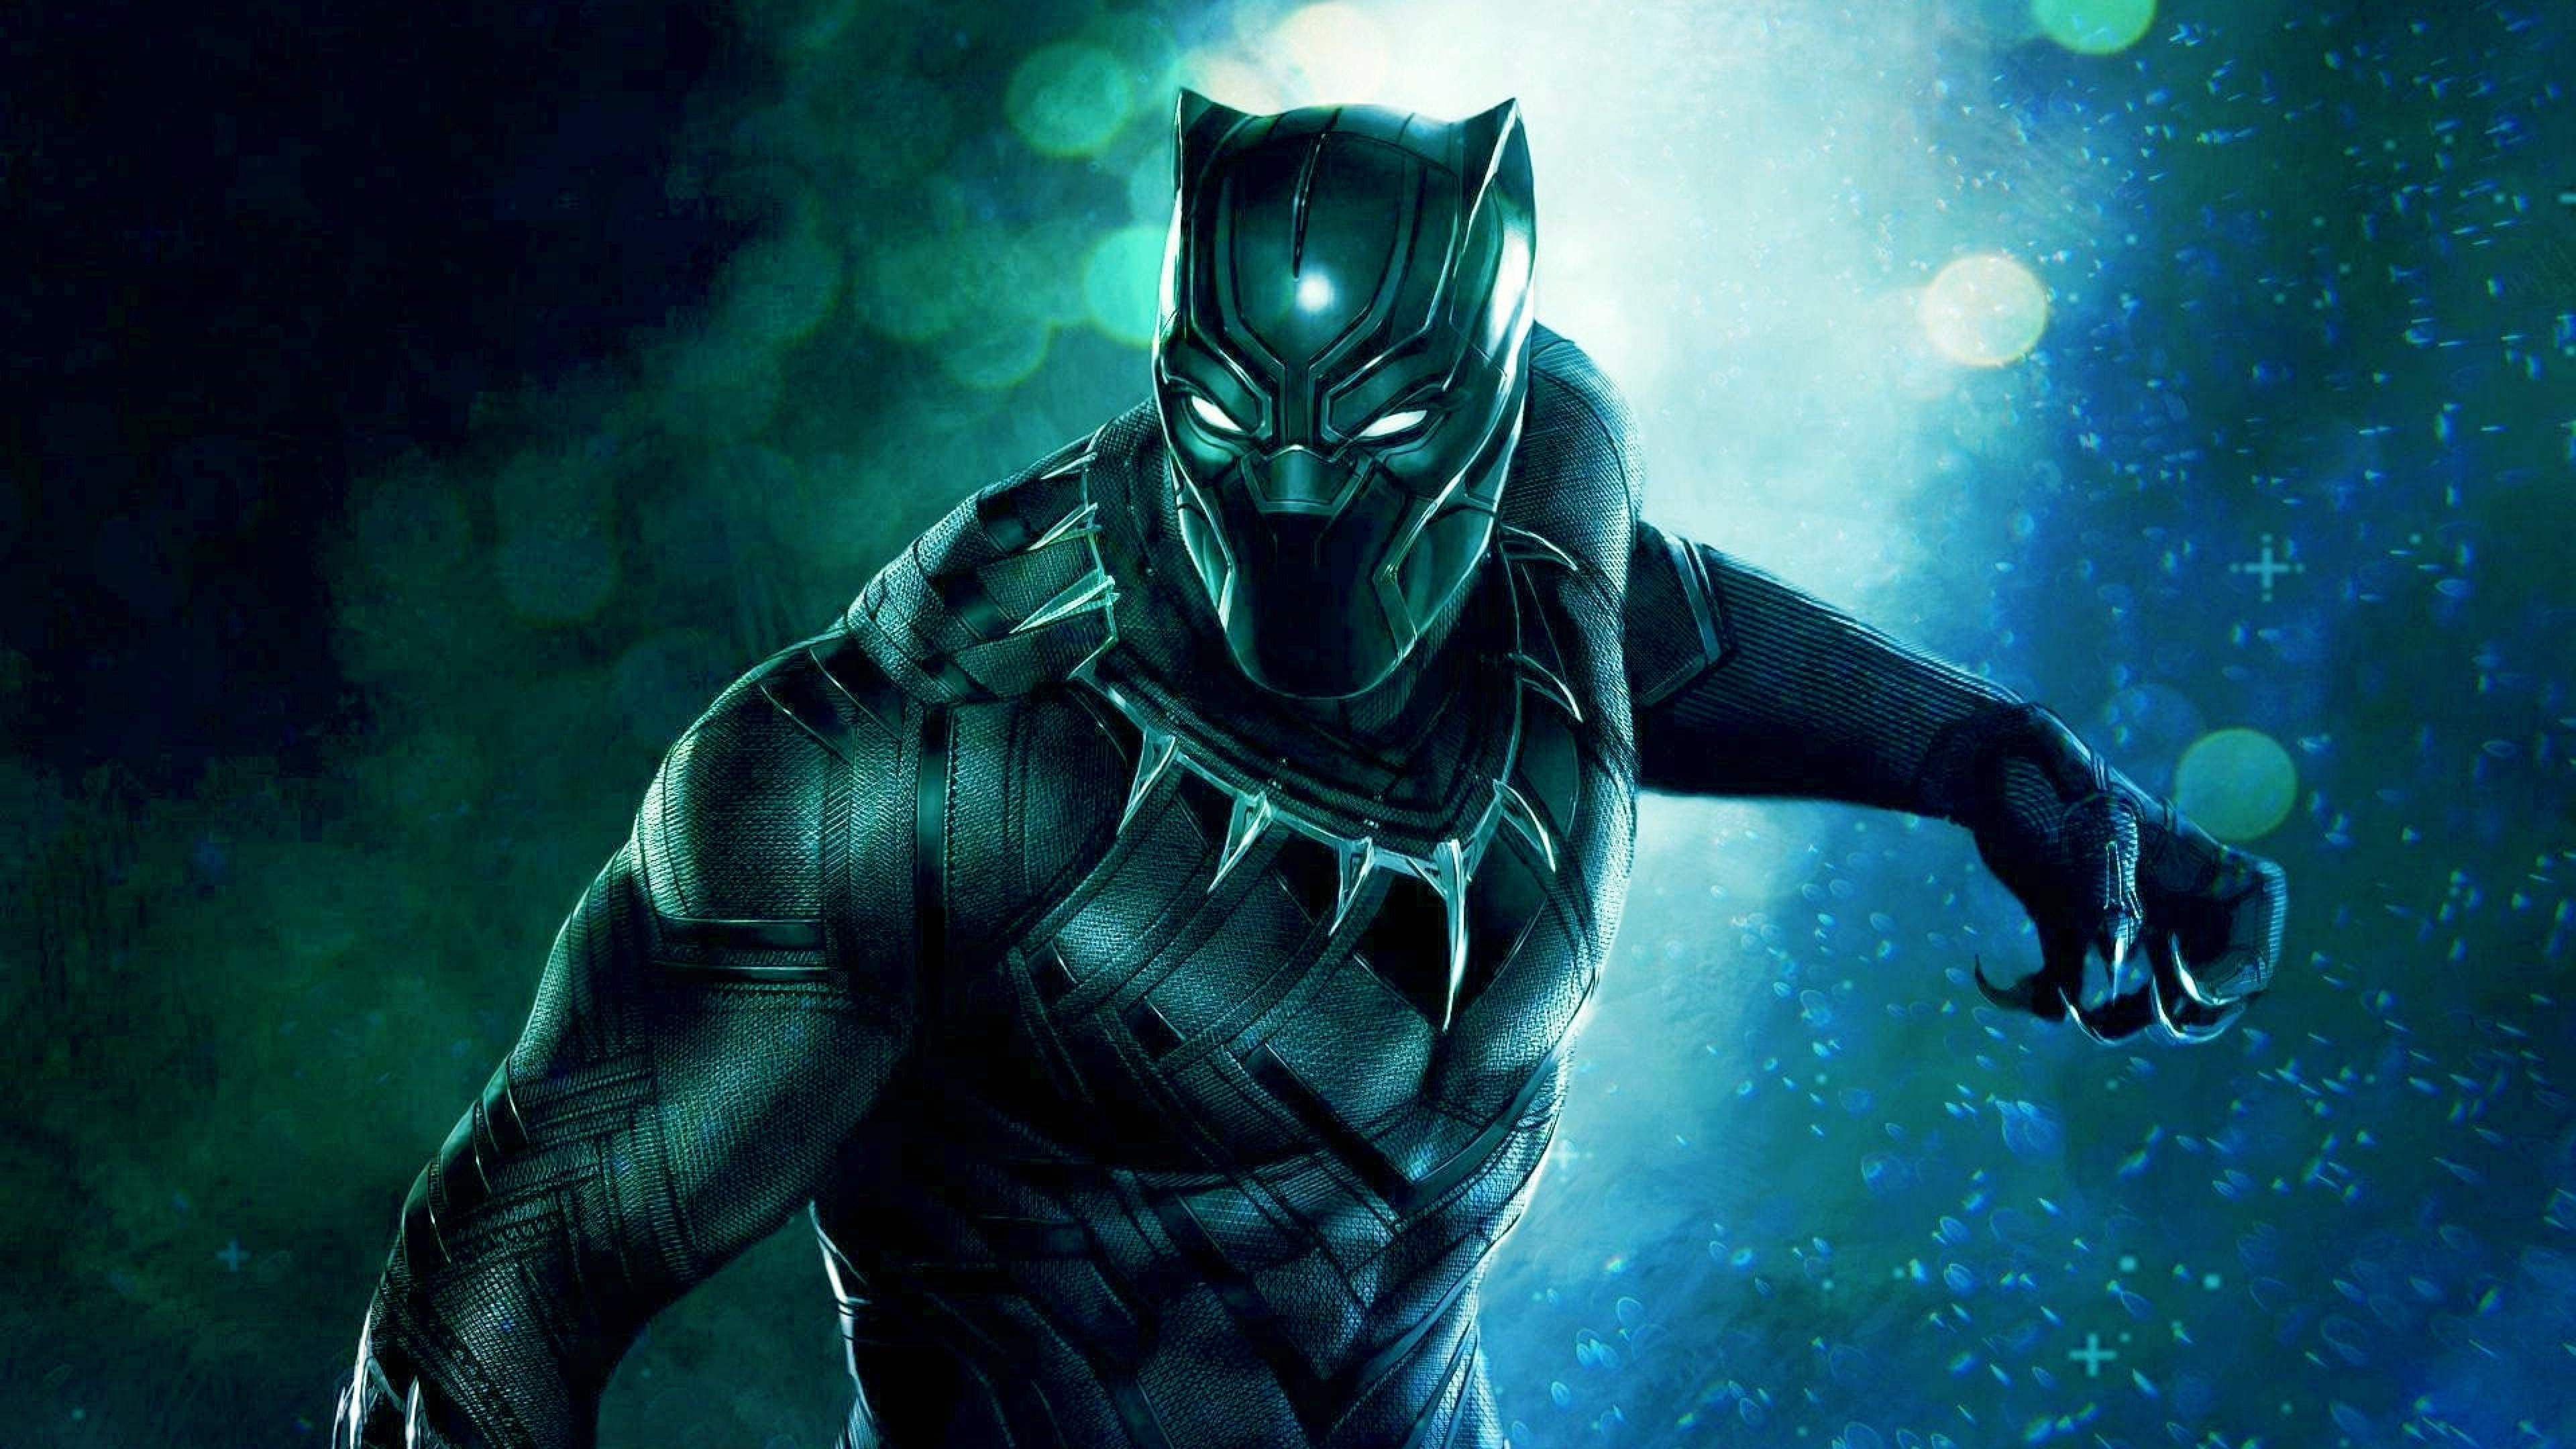 Black Panther characters, Wallpapers, Photos, Pictures, 3840x2160 4K Desktop